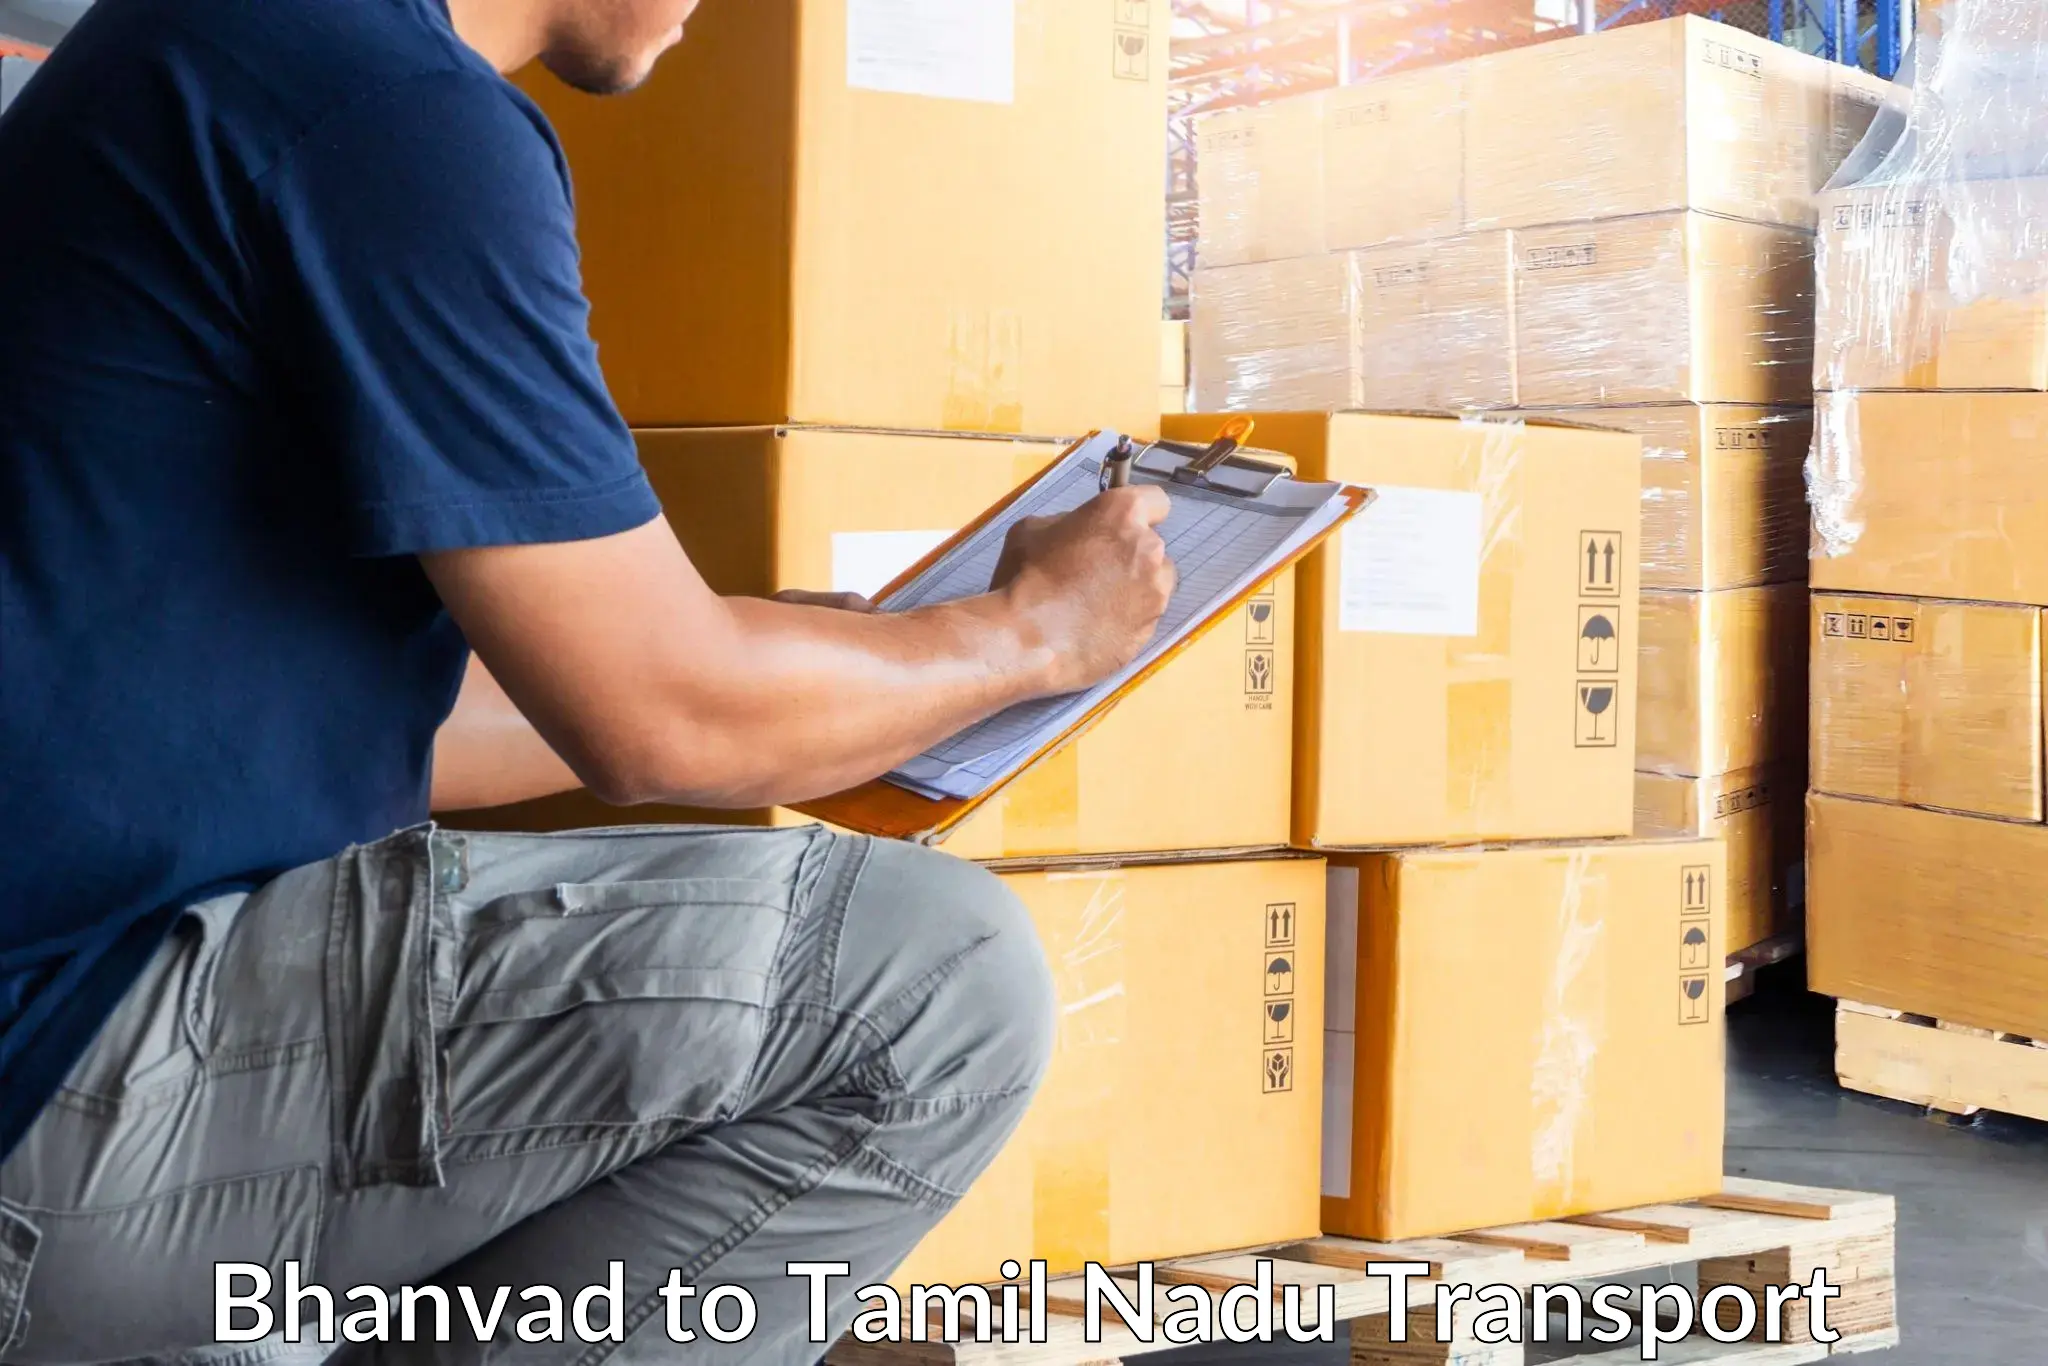 Shipping services Bhanvad to Melmaruvathur